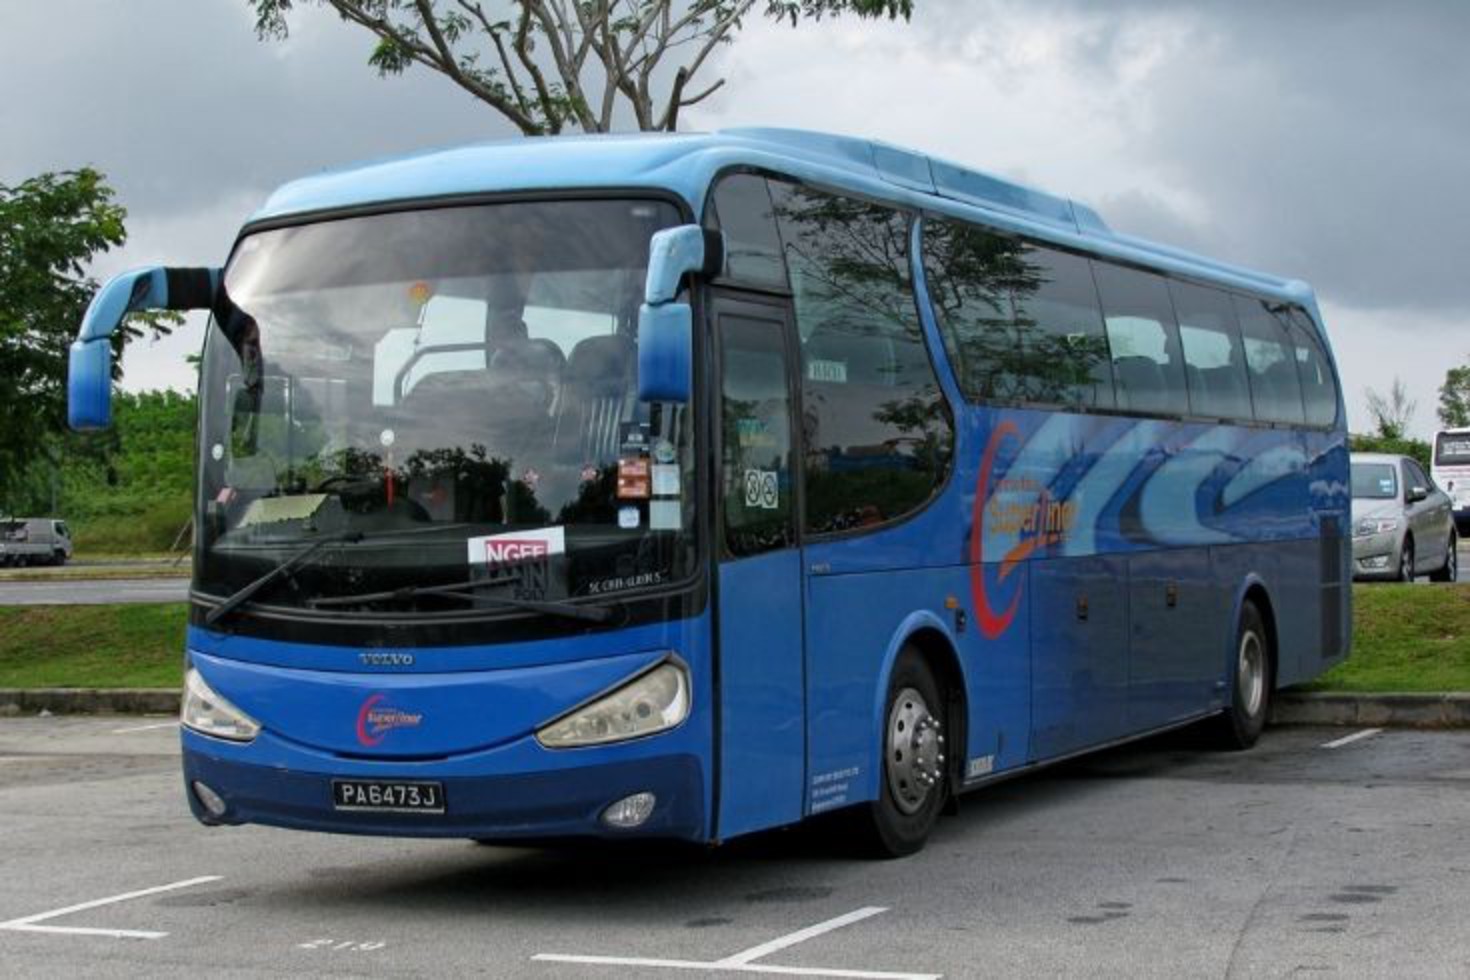 Volvo B7R picture (2). Published August 4, 2012 in Volvo B7R